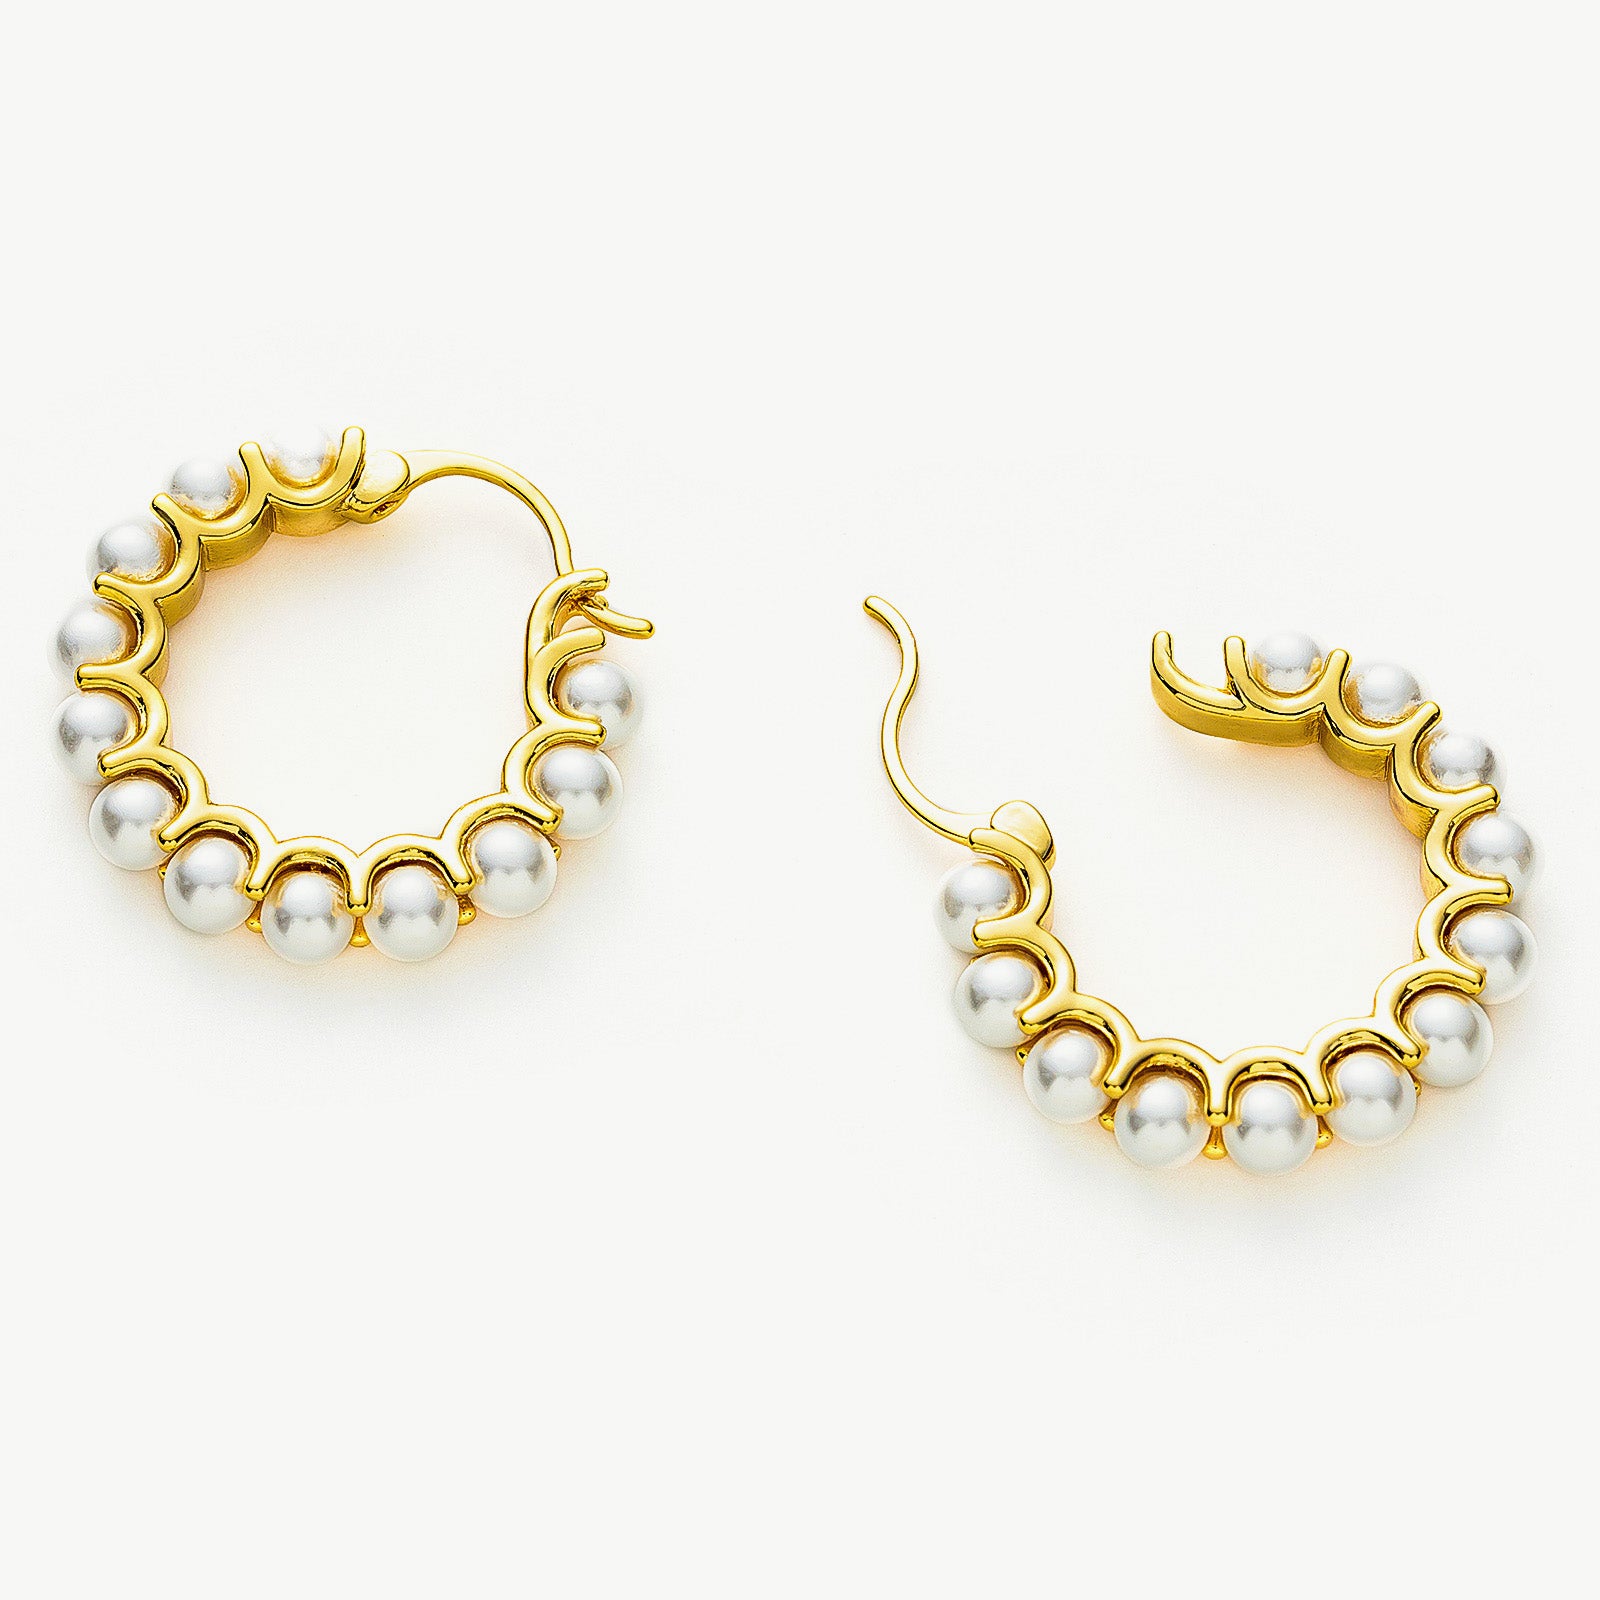 Medium Pearl Huggie Earrings creating timeless loops of pearl charm, these earrings offer a classic and versatile accessory that complements any outfit with grace